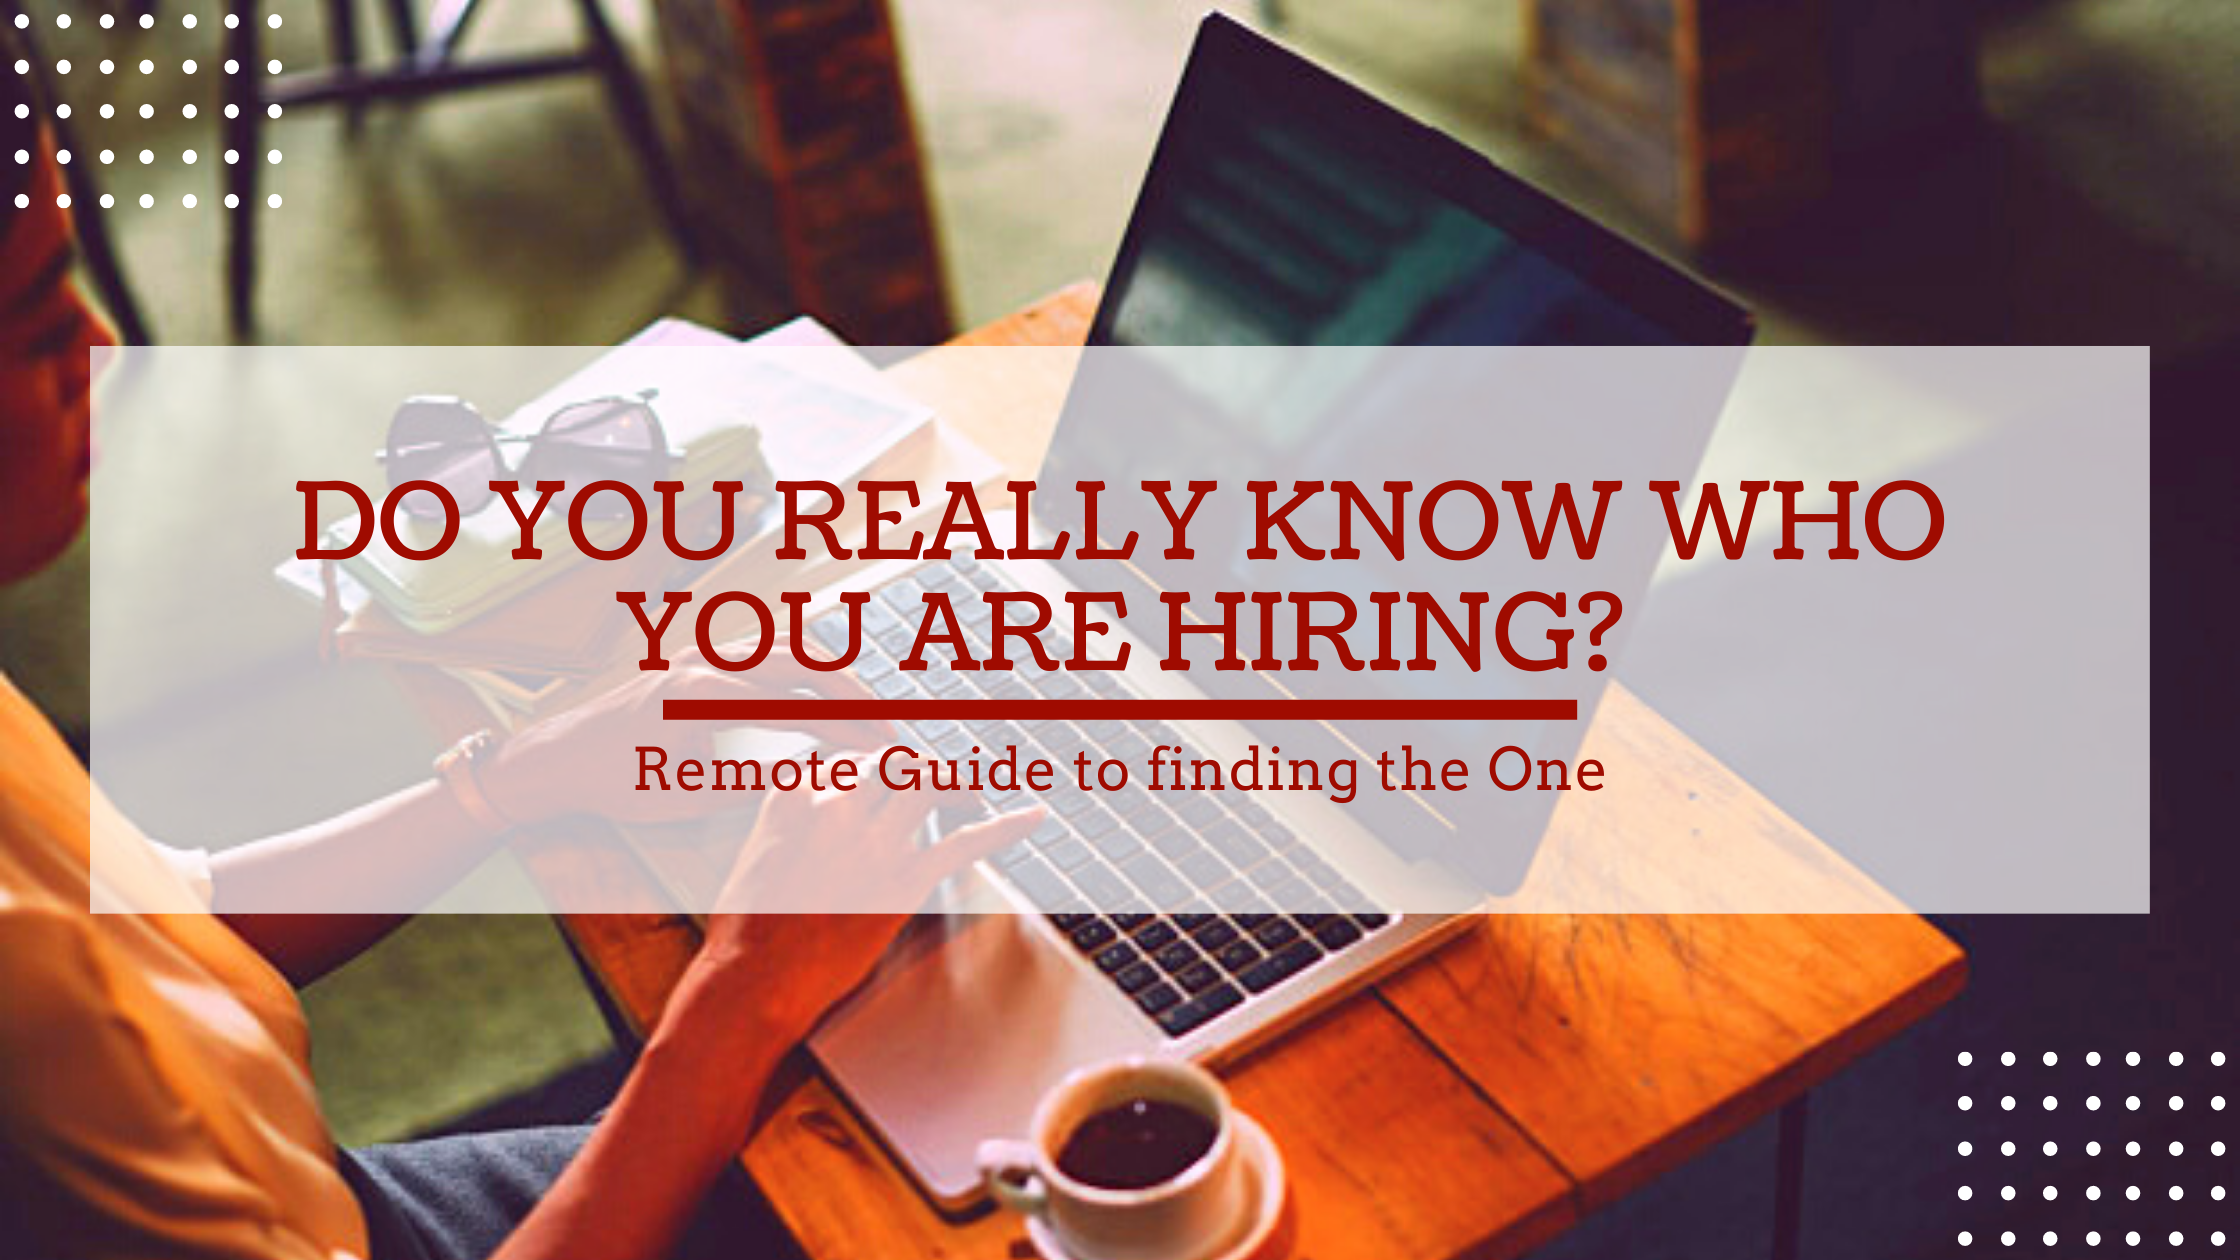 Do you really know who you are hiring? REMOTE guide to finding the ONE